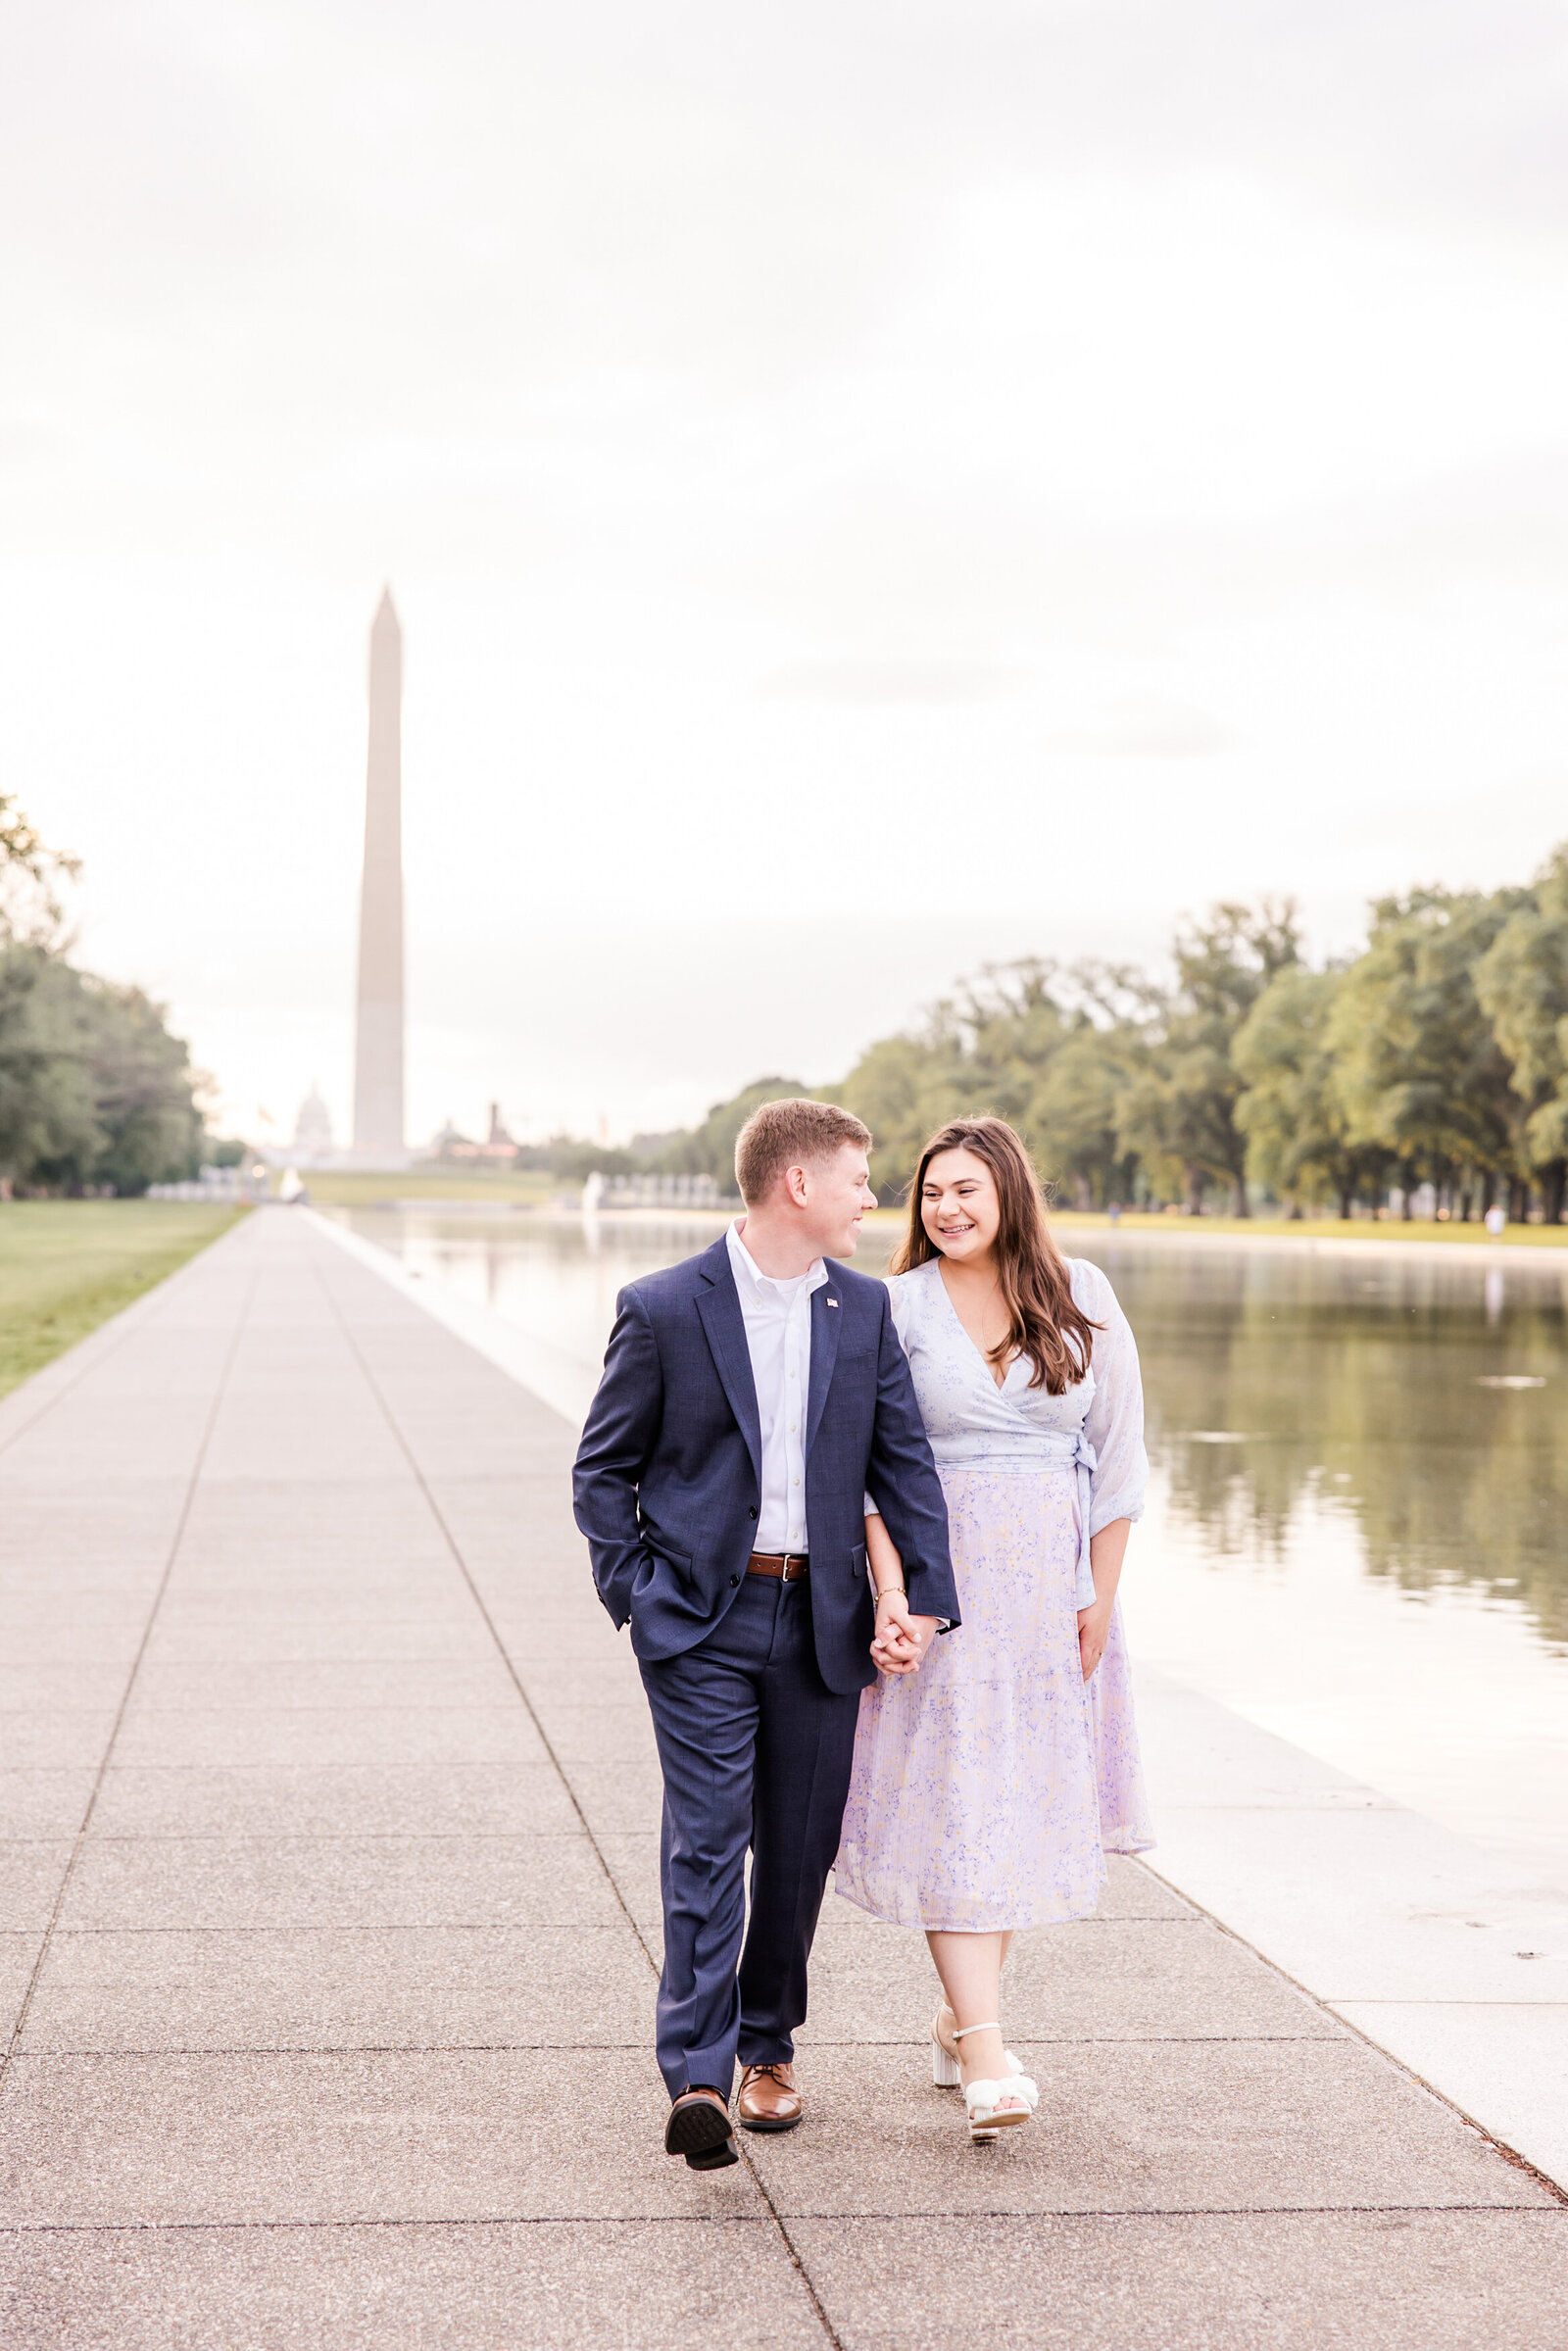 04Lincoln_Memorial_Engagement_Photo_Photographer_Carter35